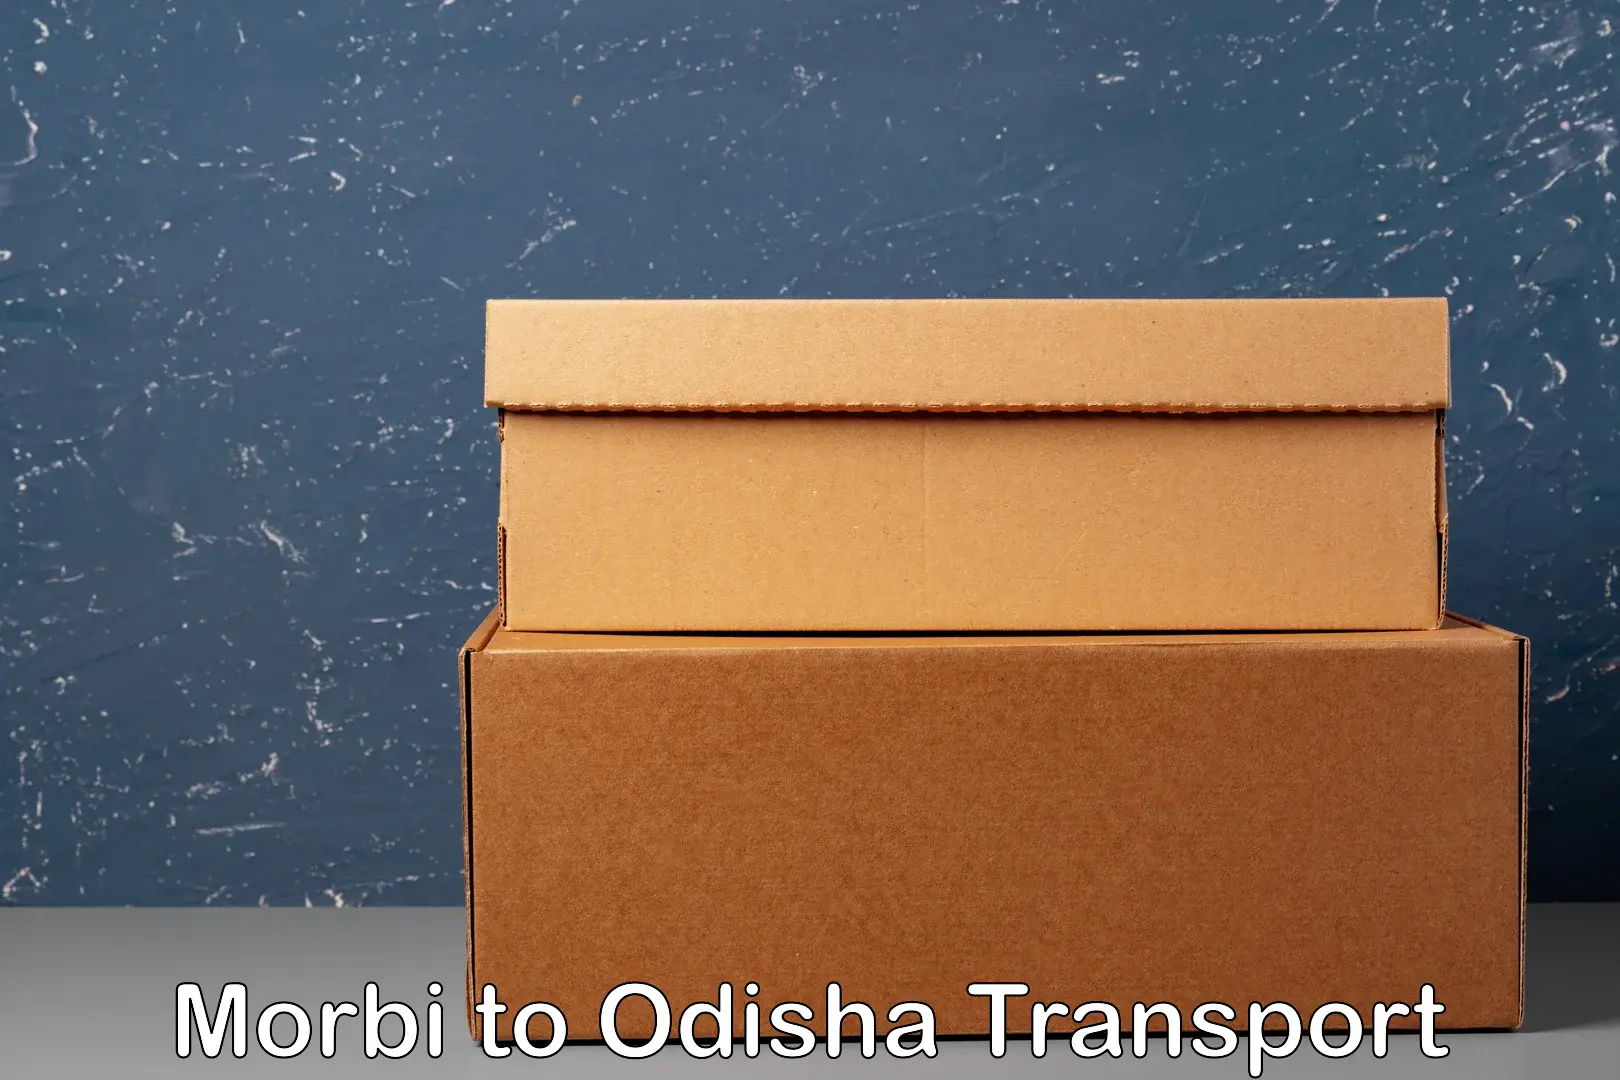 Truck transport companies in India in Morbi to Odisha